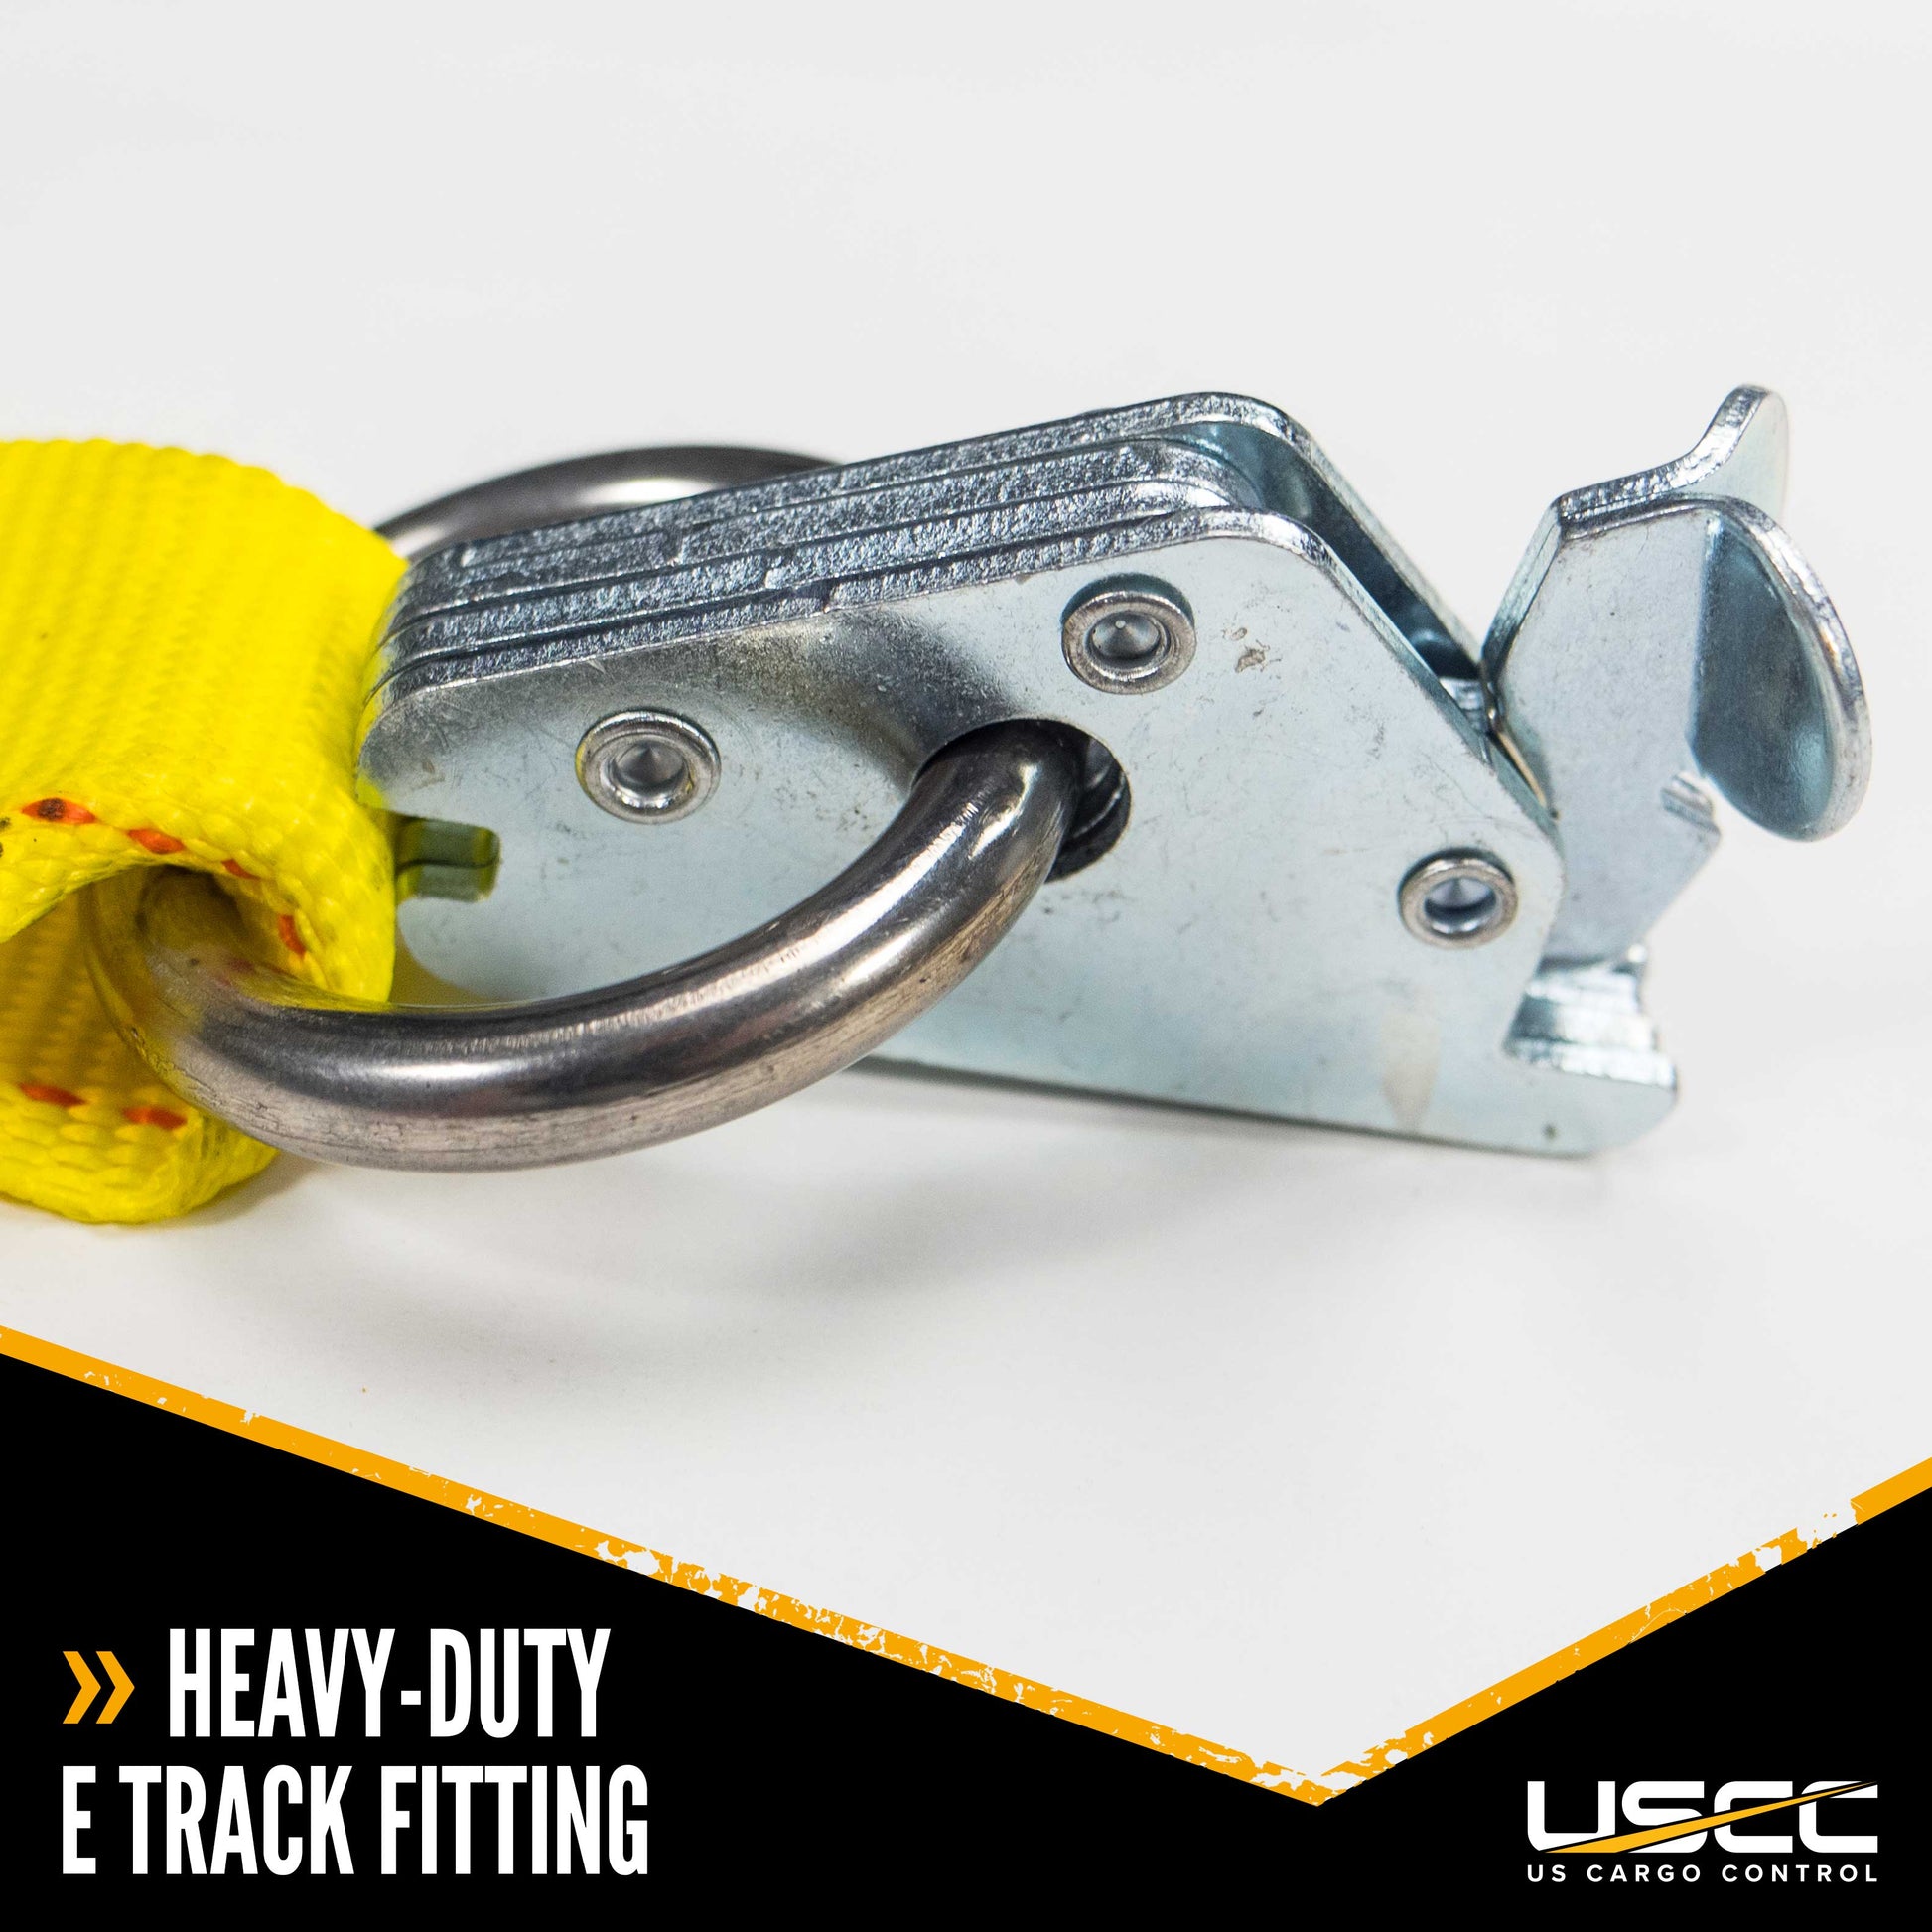 Heavy Duty 6 inch E Track Rope TieOff image 3 of 7